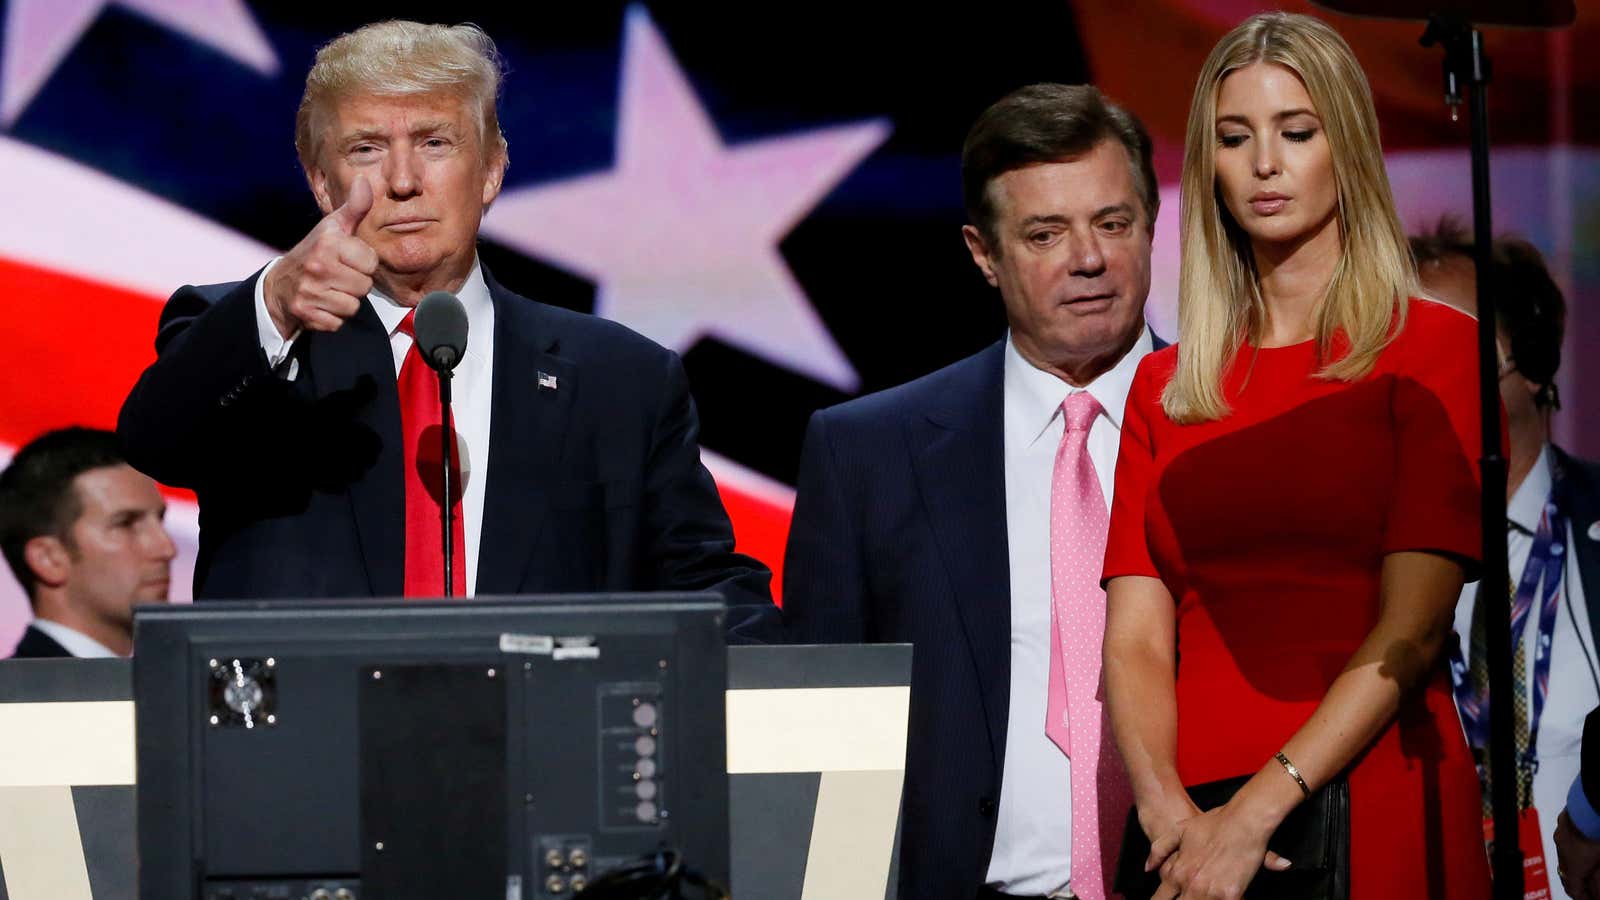 Trump, Manafort and Ivanka Trump at the Republican National Convention in Cleveland. July 21, 2016.